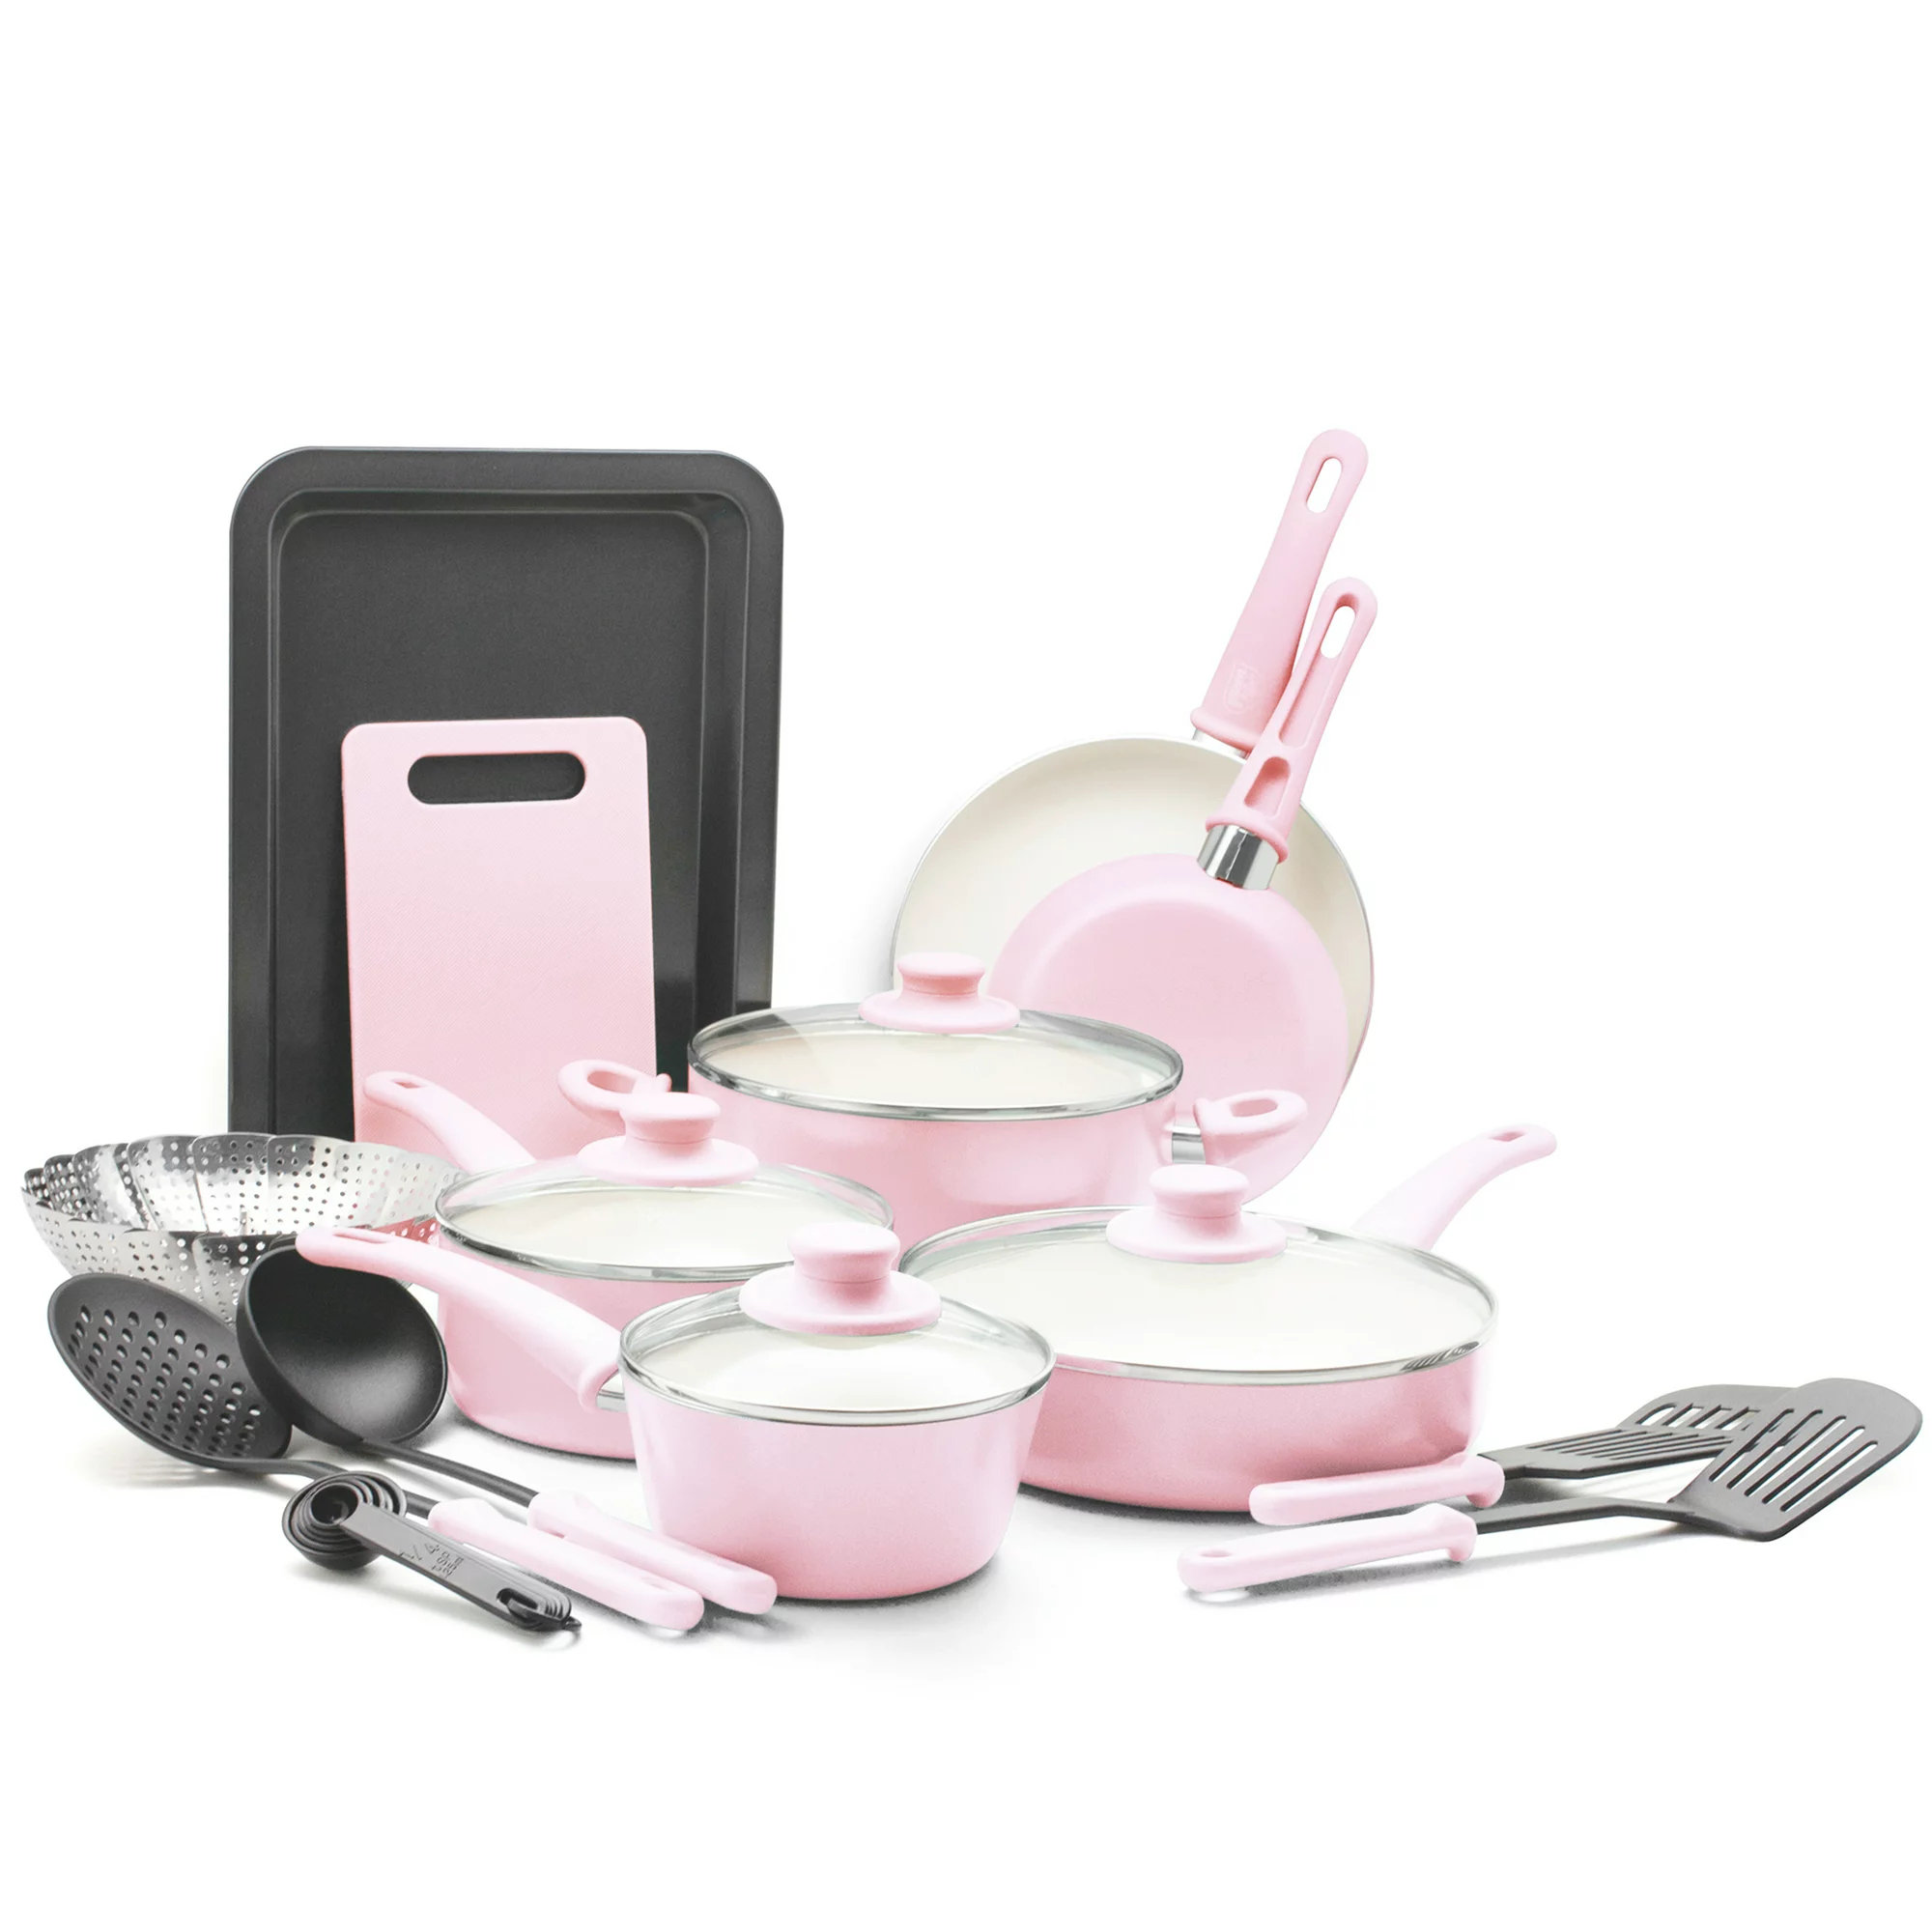 12PCS Stainless Steel Non Stick Kitchenware Pot Sets Cookware Pink